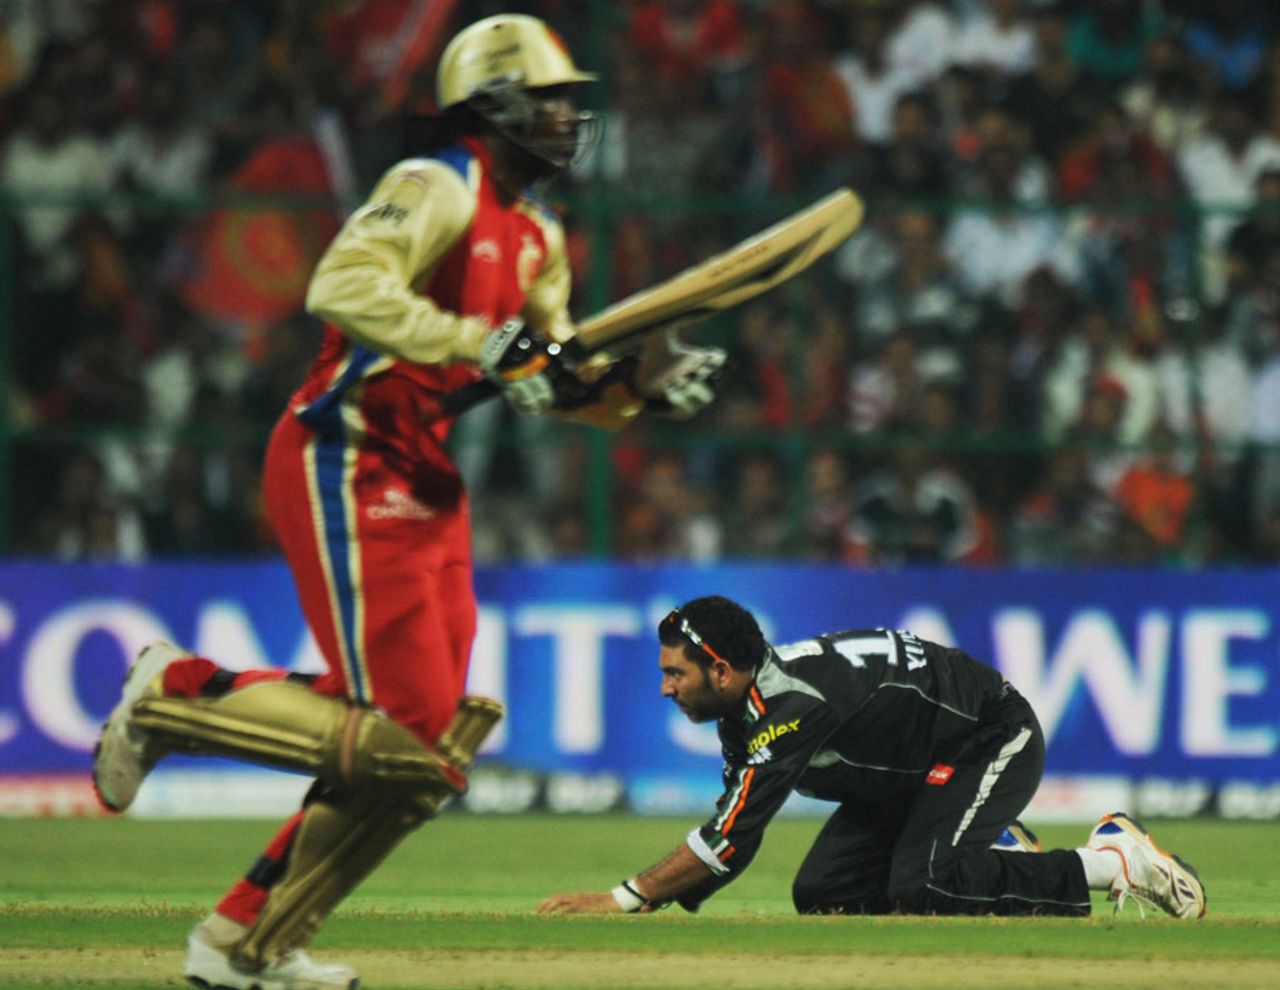 It was a tough day in the office for Yuvraj Singh, Royal Challengers Bangalore v Pune Warriors, IPL 2011, Bangalore, April 29, 2011